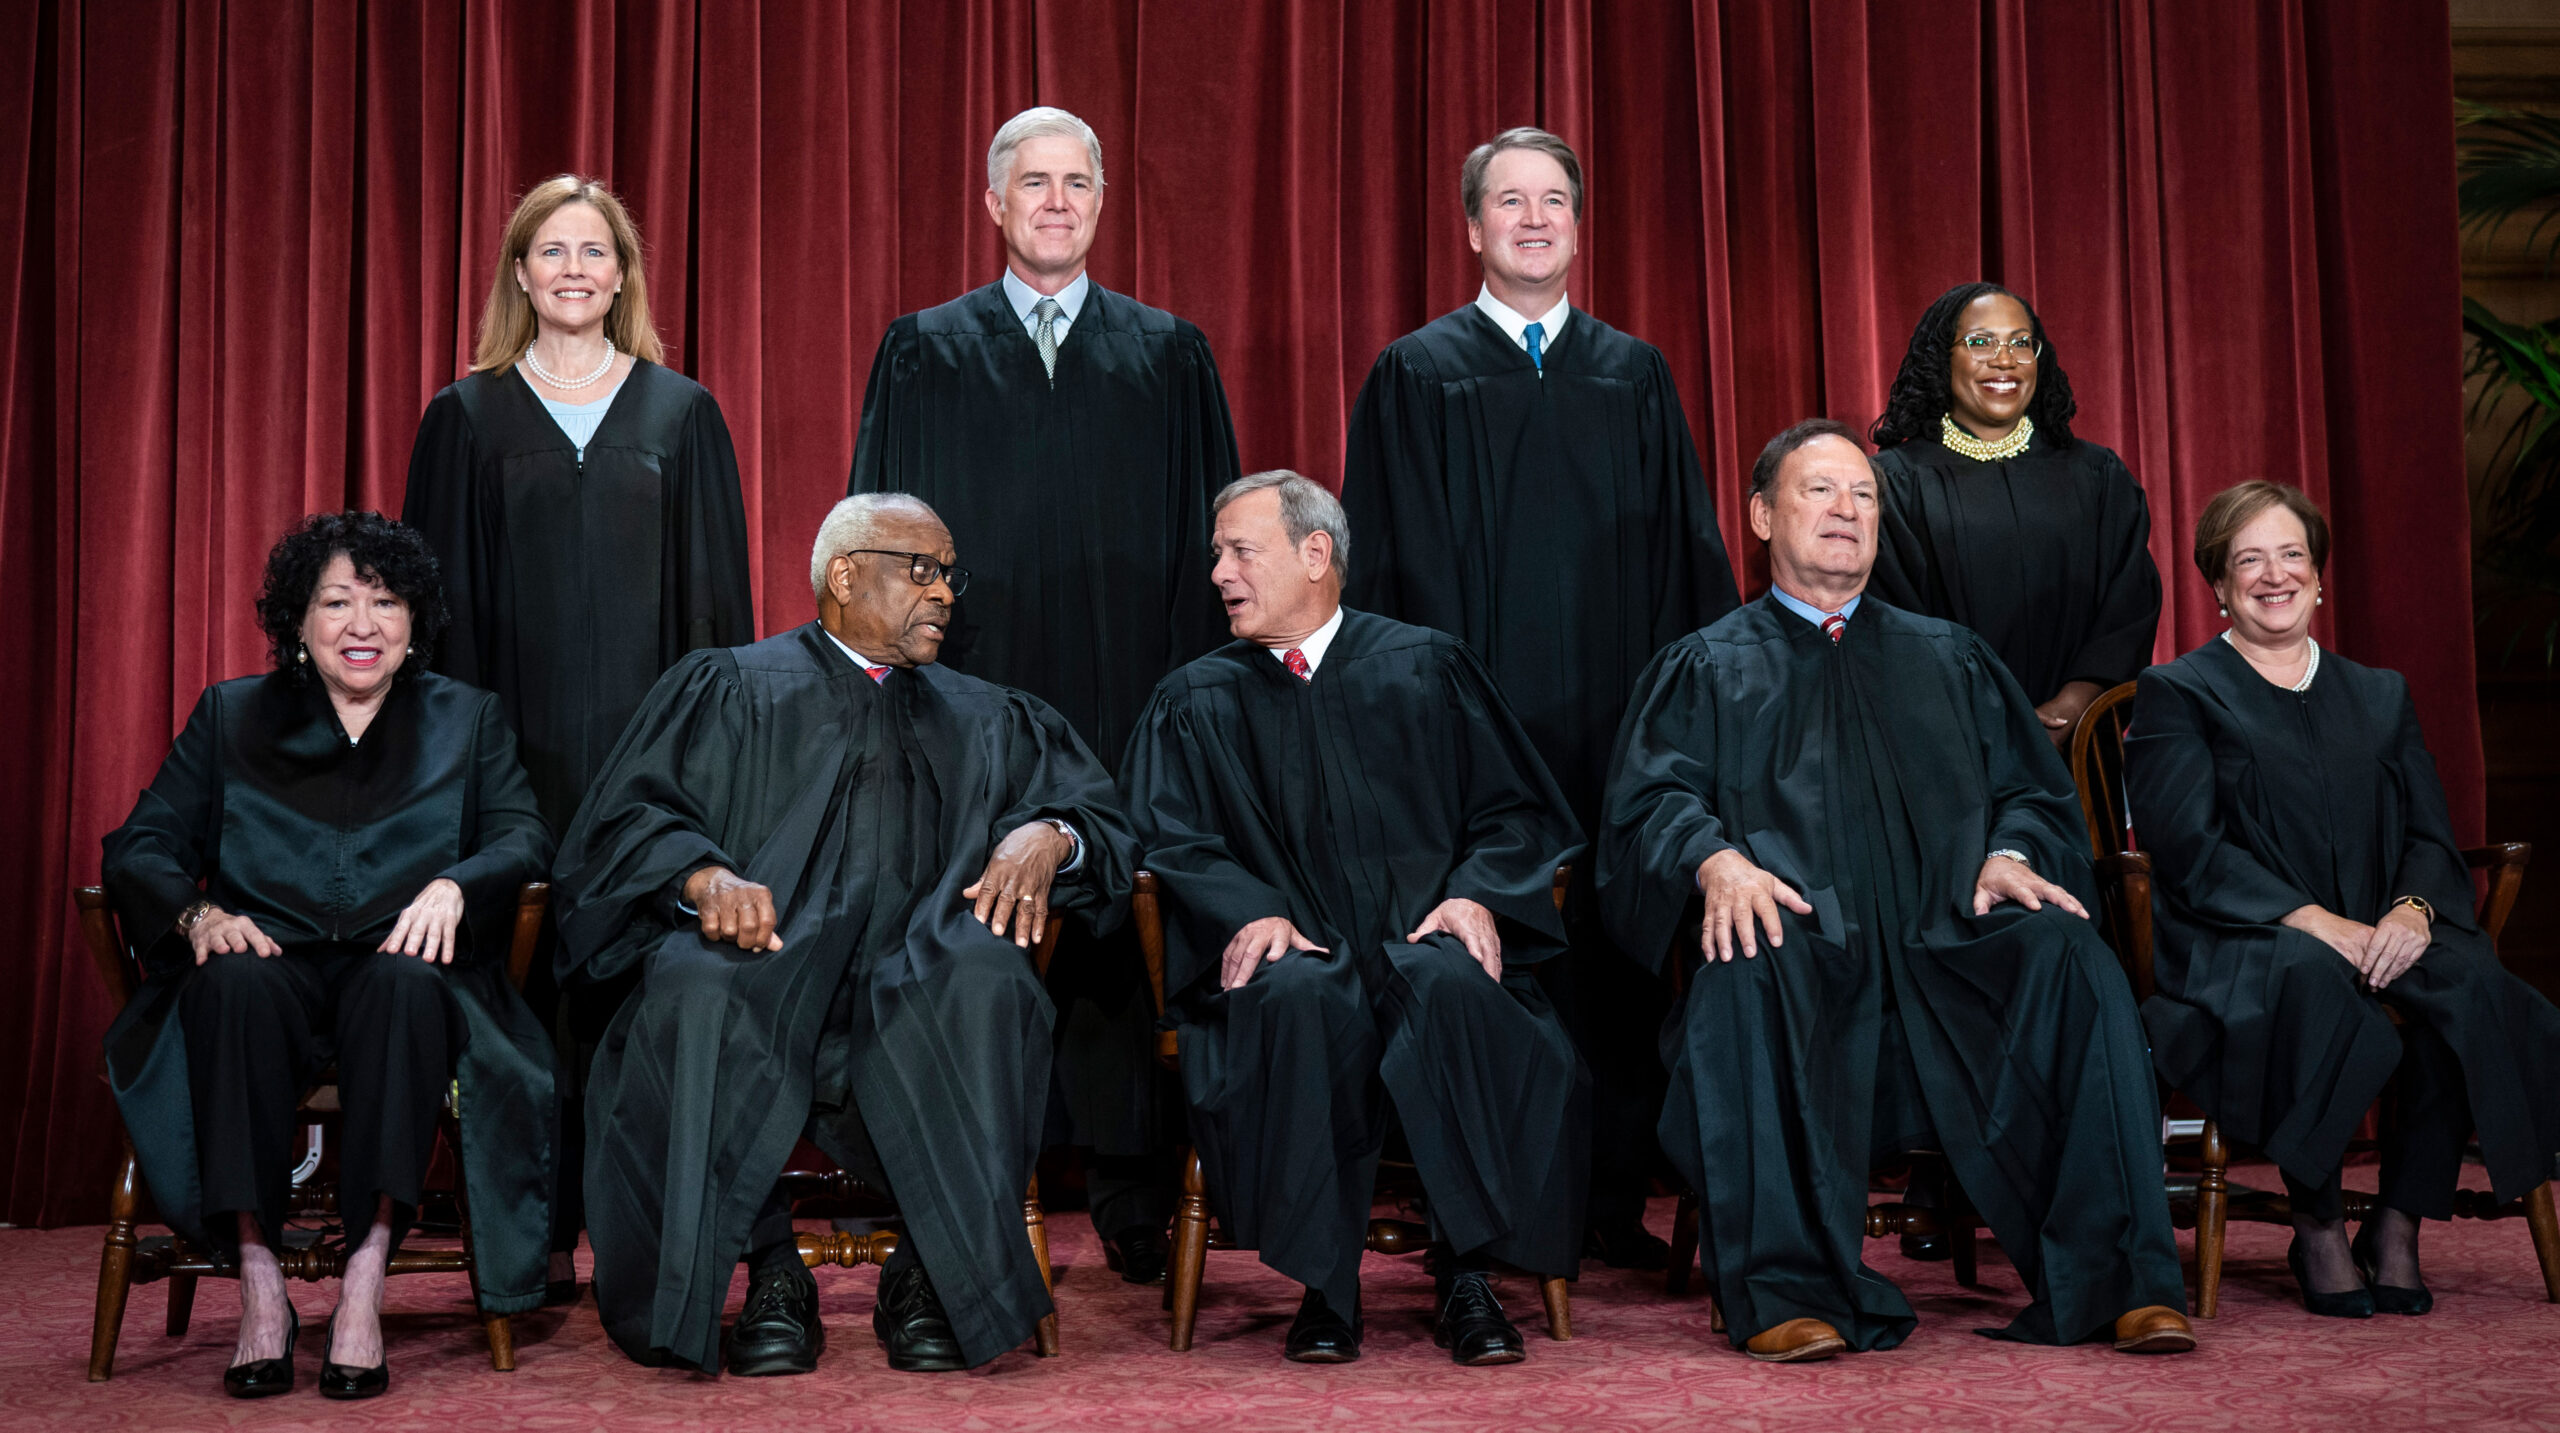 Justices Again Show Undue Deference to Feds, but Take Case That Could Undo That